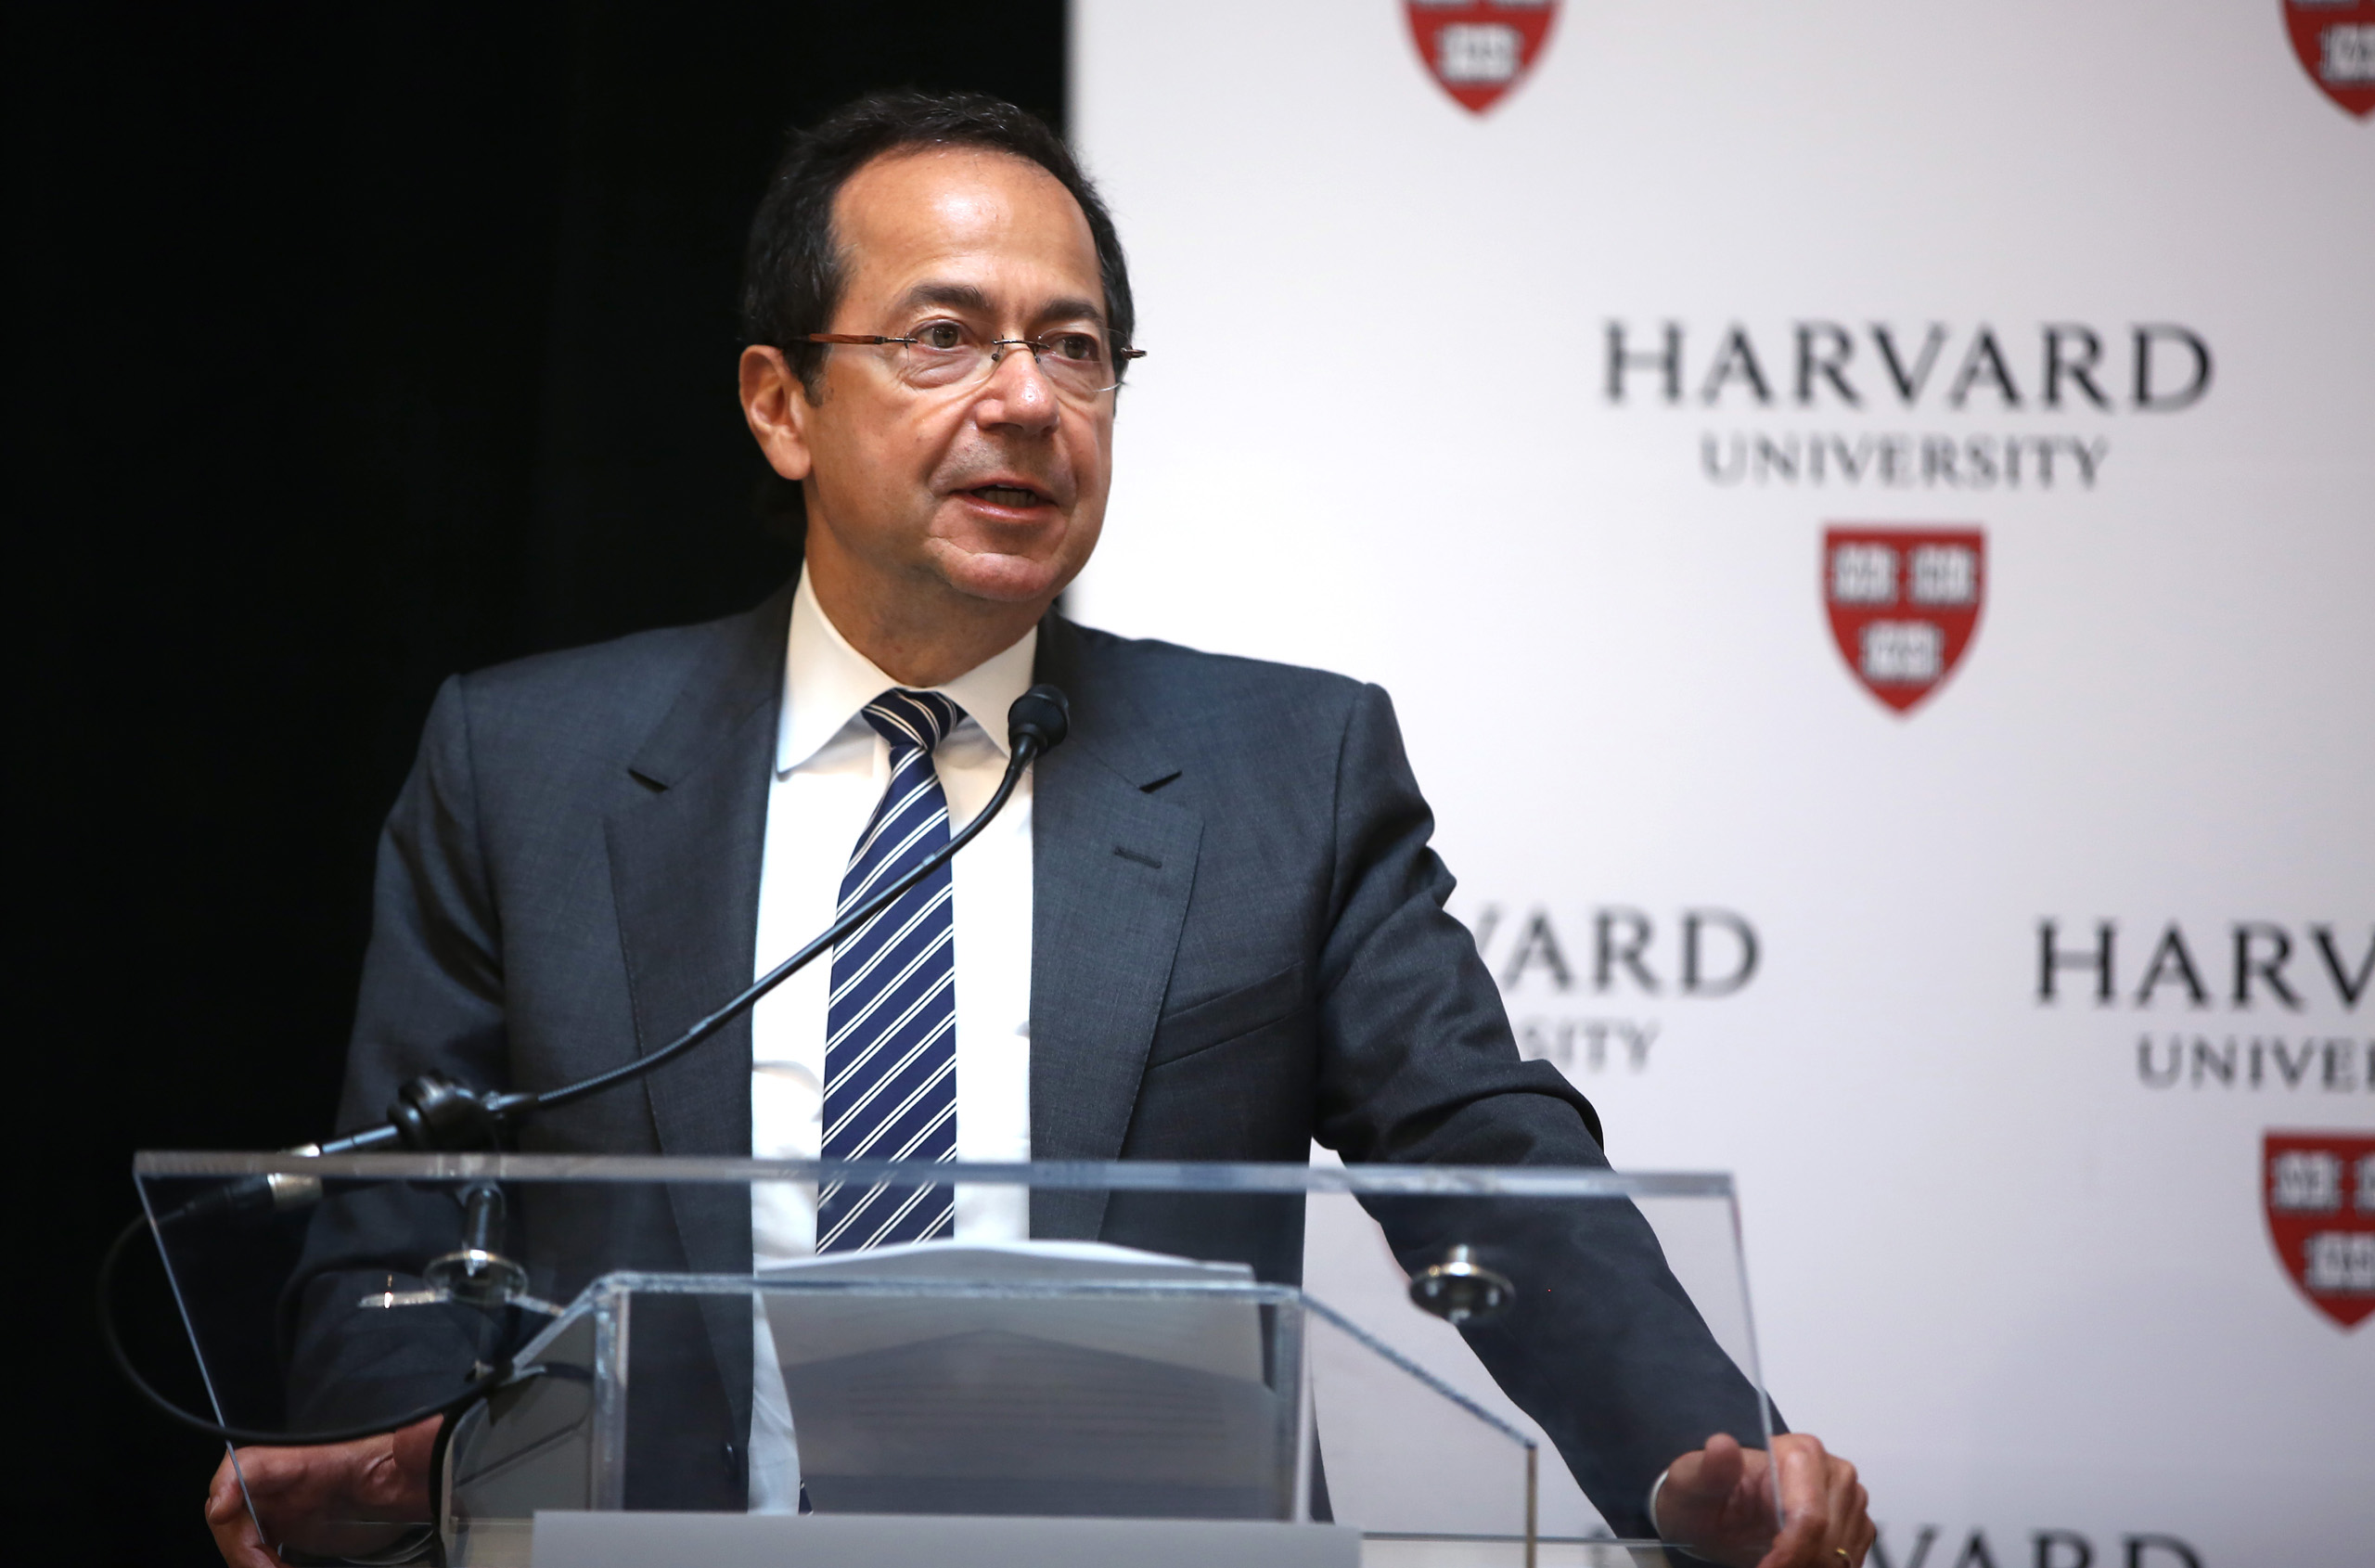 John A. Paulson makes comments during a noontime press conference at Harvard University to announce his gift of $400 million in Cambridge, Ma. on June 3, 2015. ((The Boston Globe/Getty Images))